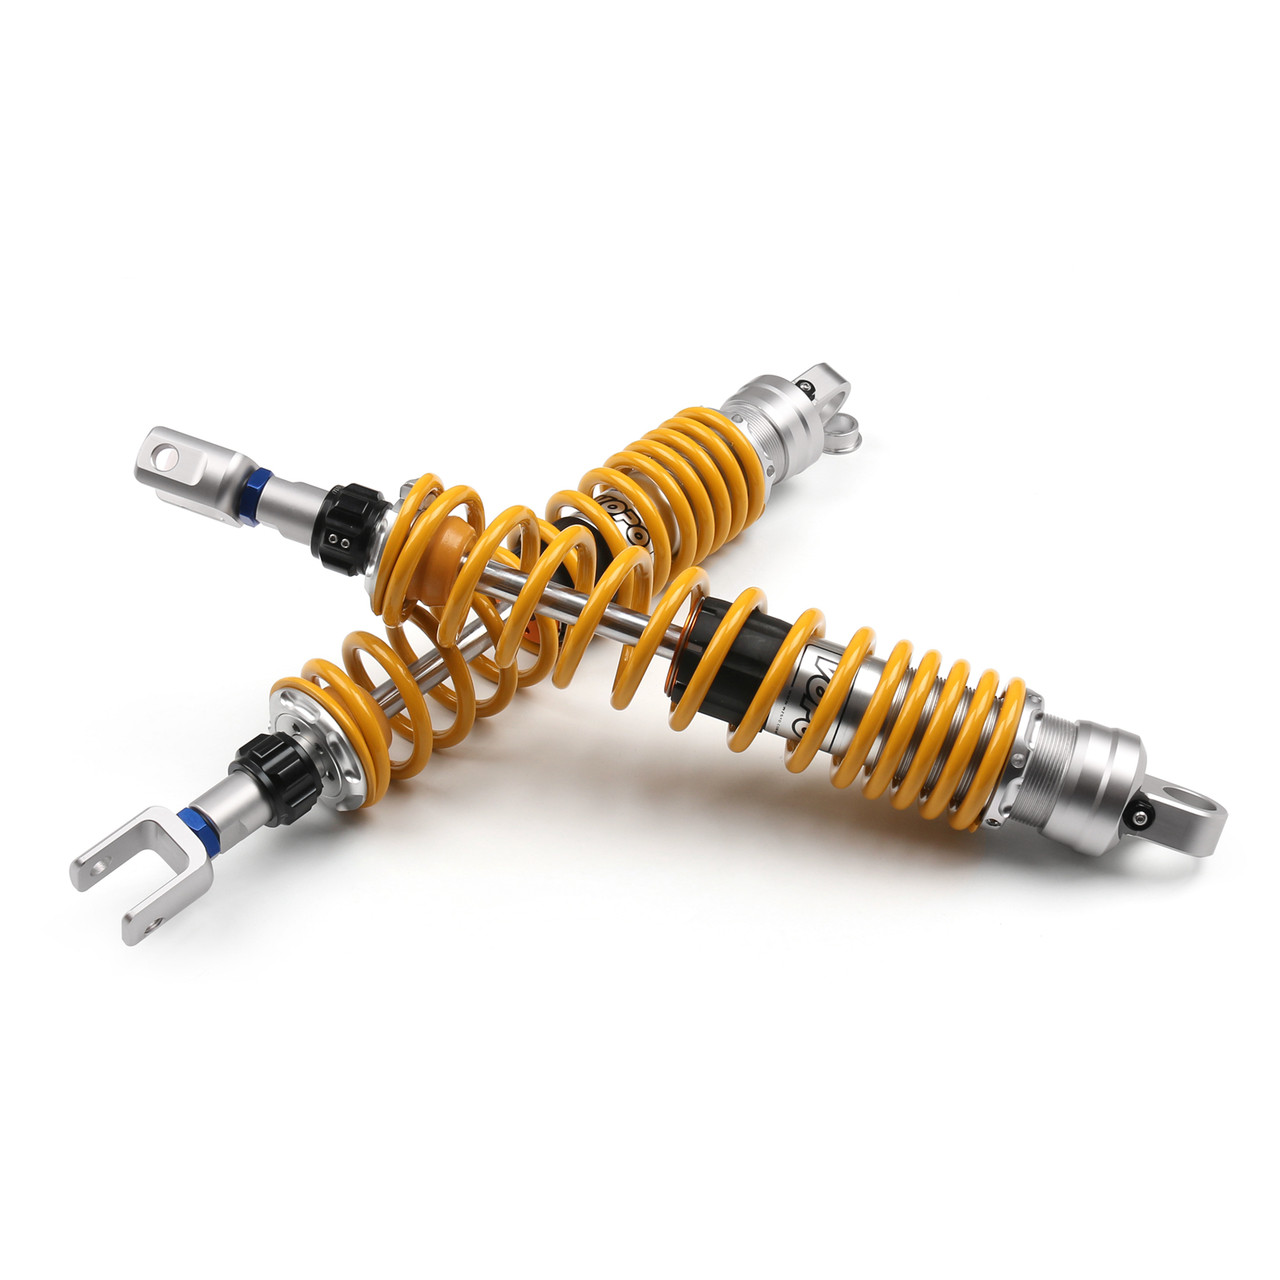 425mm Rear Air Shock Absorbers Suspension For Honda Silver Wing 600, Gold